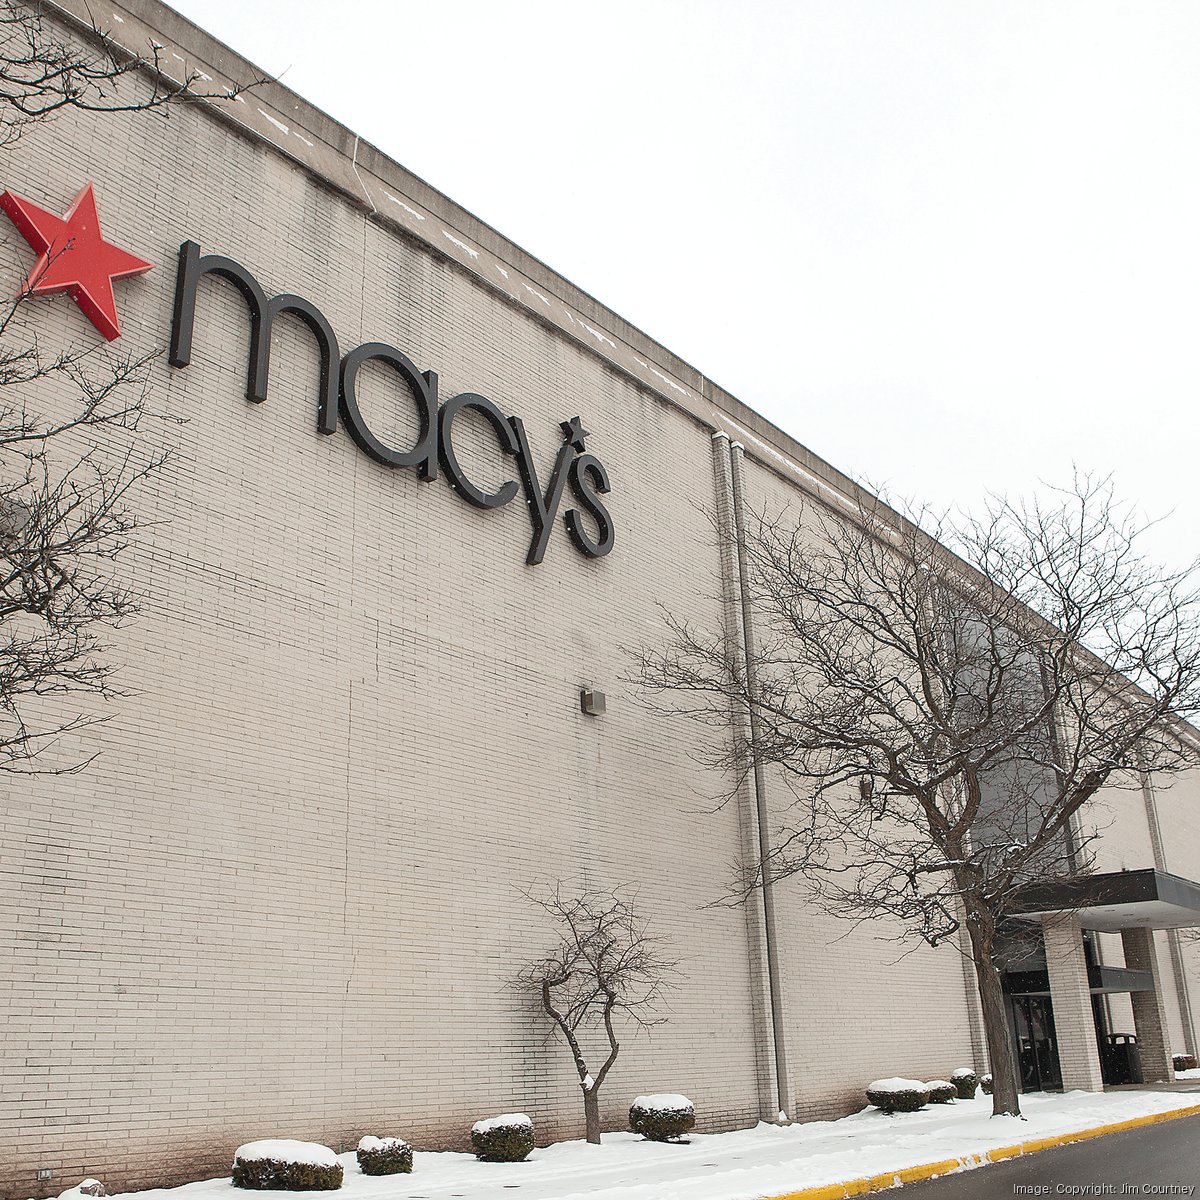 The Future of Macy's, Nordstrom, and Other Department Stores